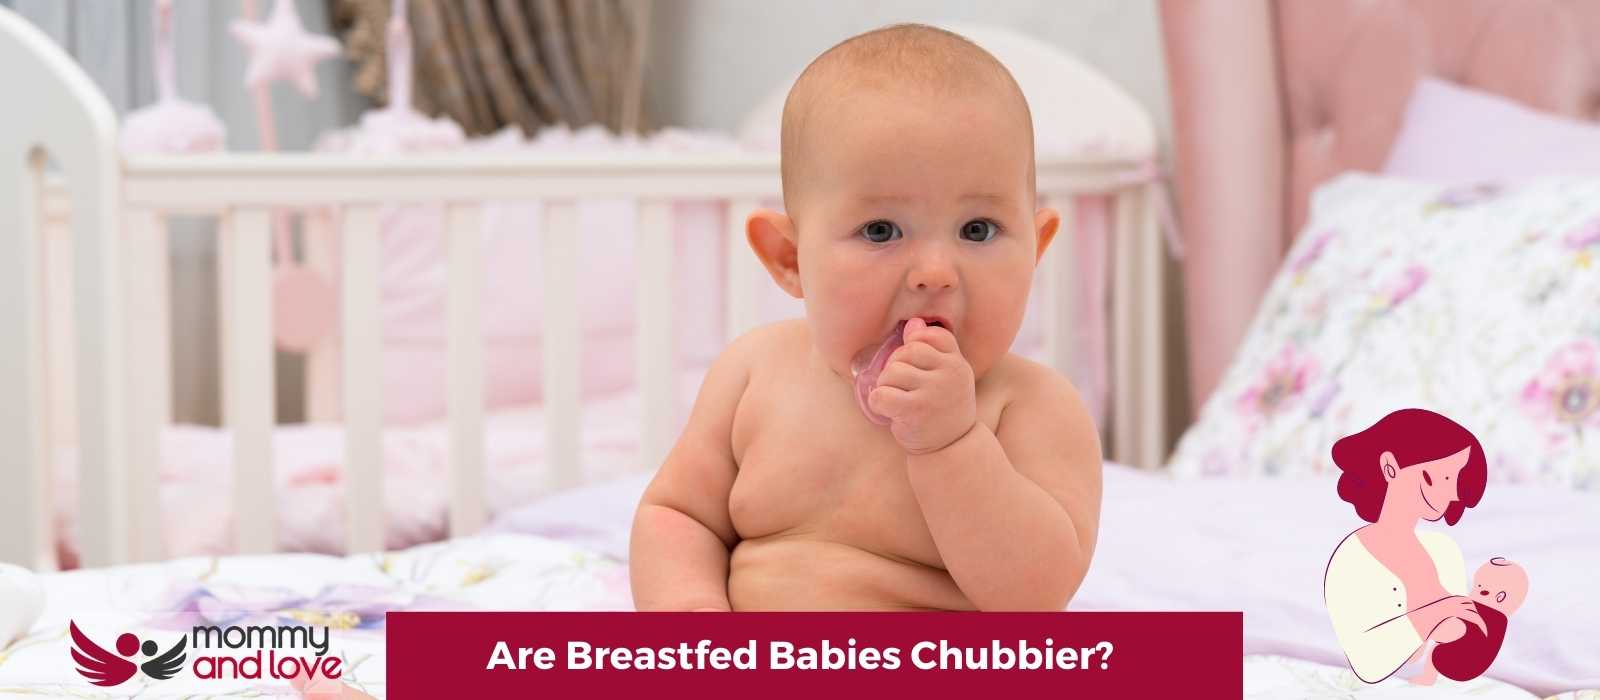 Are Breastfed Babies Chubbier (1)